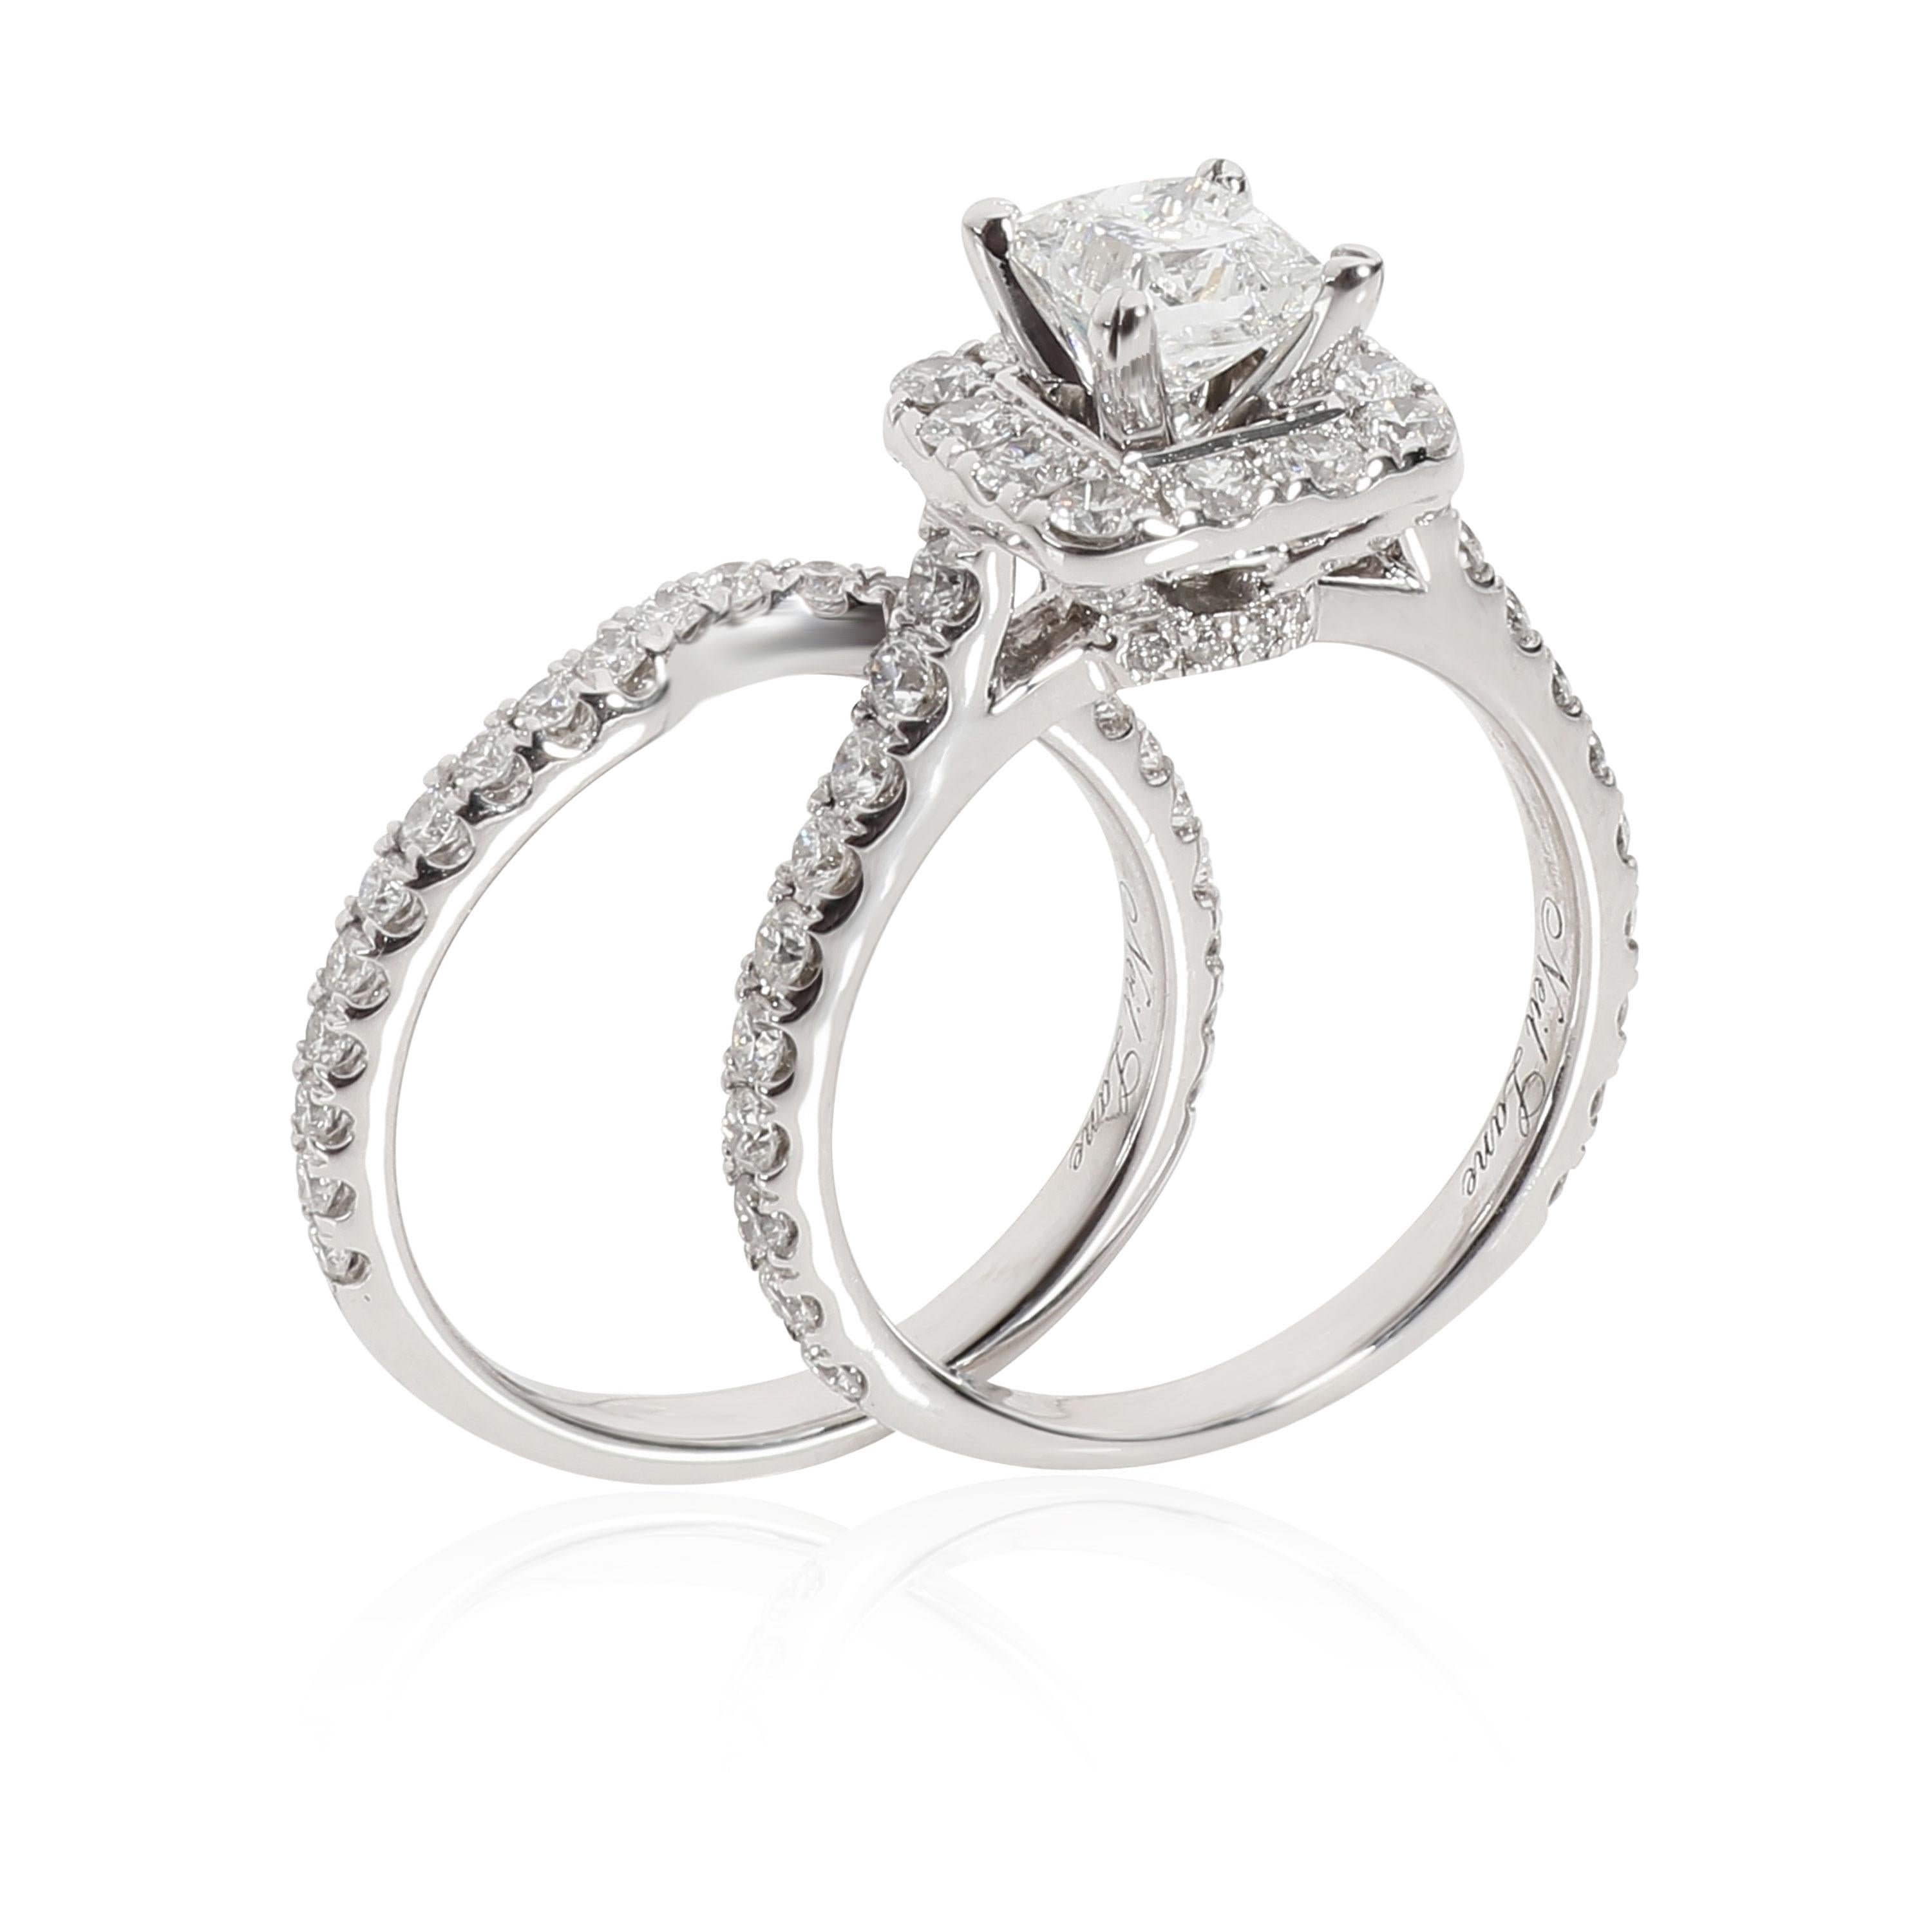 Neil Lane Halo Princess Diamond Engagement Set in 14K White Gold 2.5 CTW

PRIMARY DETAILS
SKU: 108792
Listing Title: Neil Lane Halo Princess Diamond Engagement Set in 14K White Gold 2.5 CTW
Condition Description: Retails for 12,000 USD. In excellent